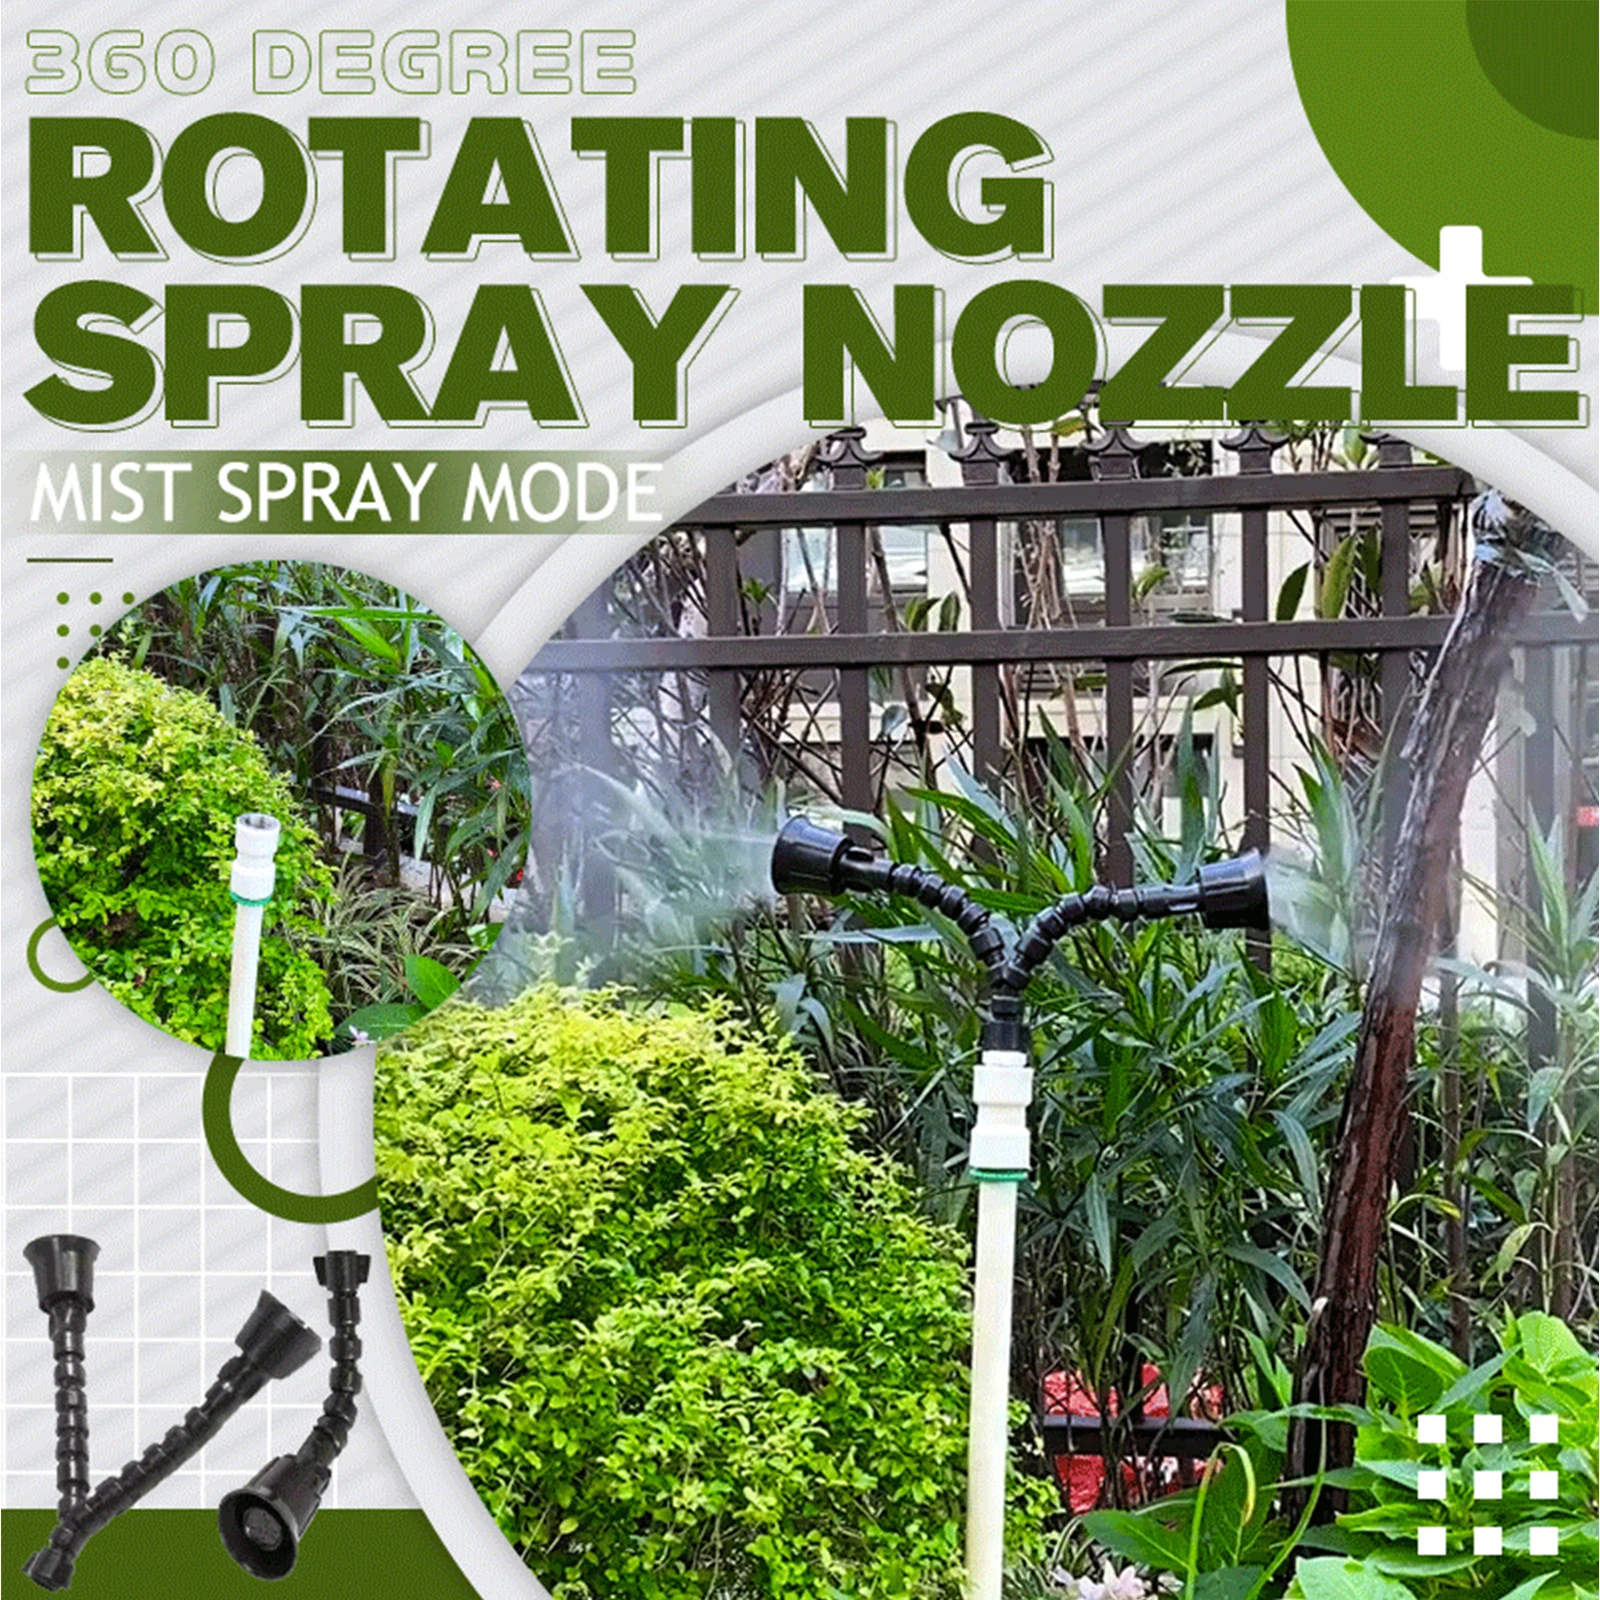 

Adjustable 360 Degree Rotating Spray Nozzle Gareden Watering Sprinkler Cooling System Reptile Humidity Mist Irrigation